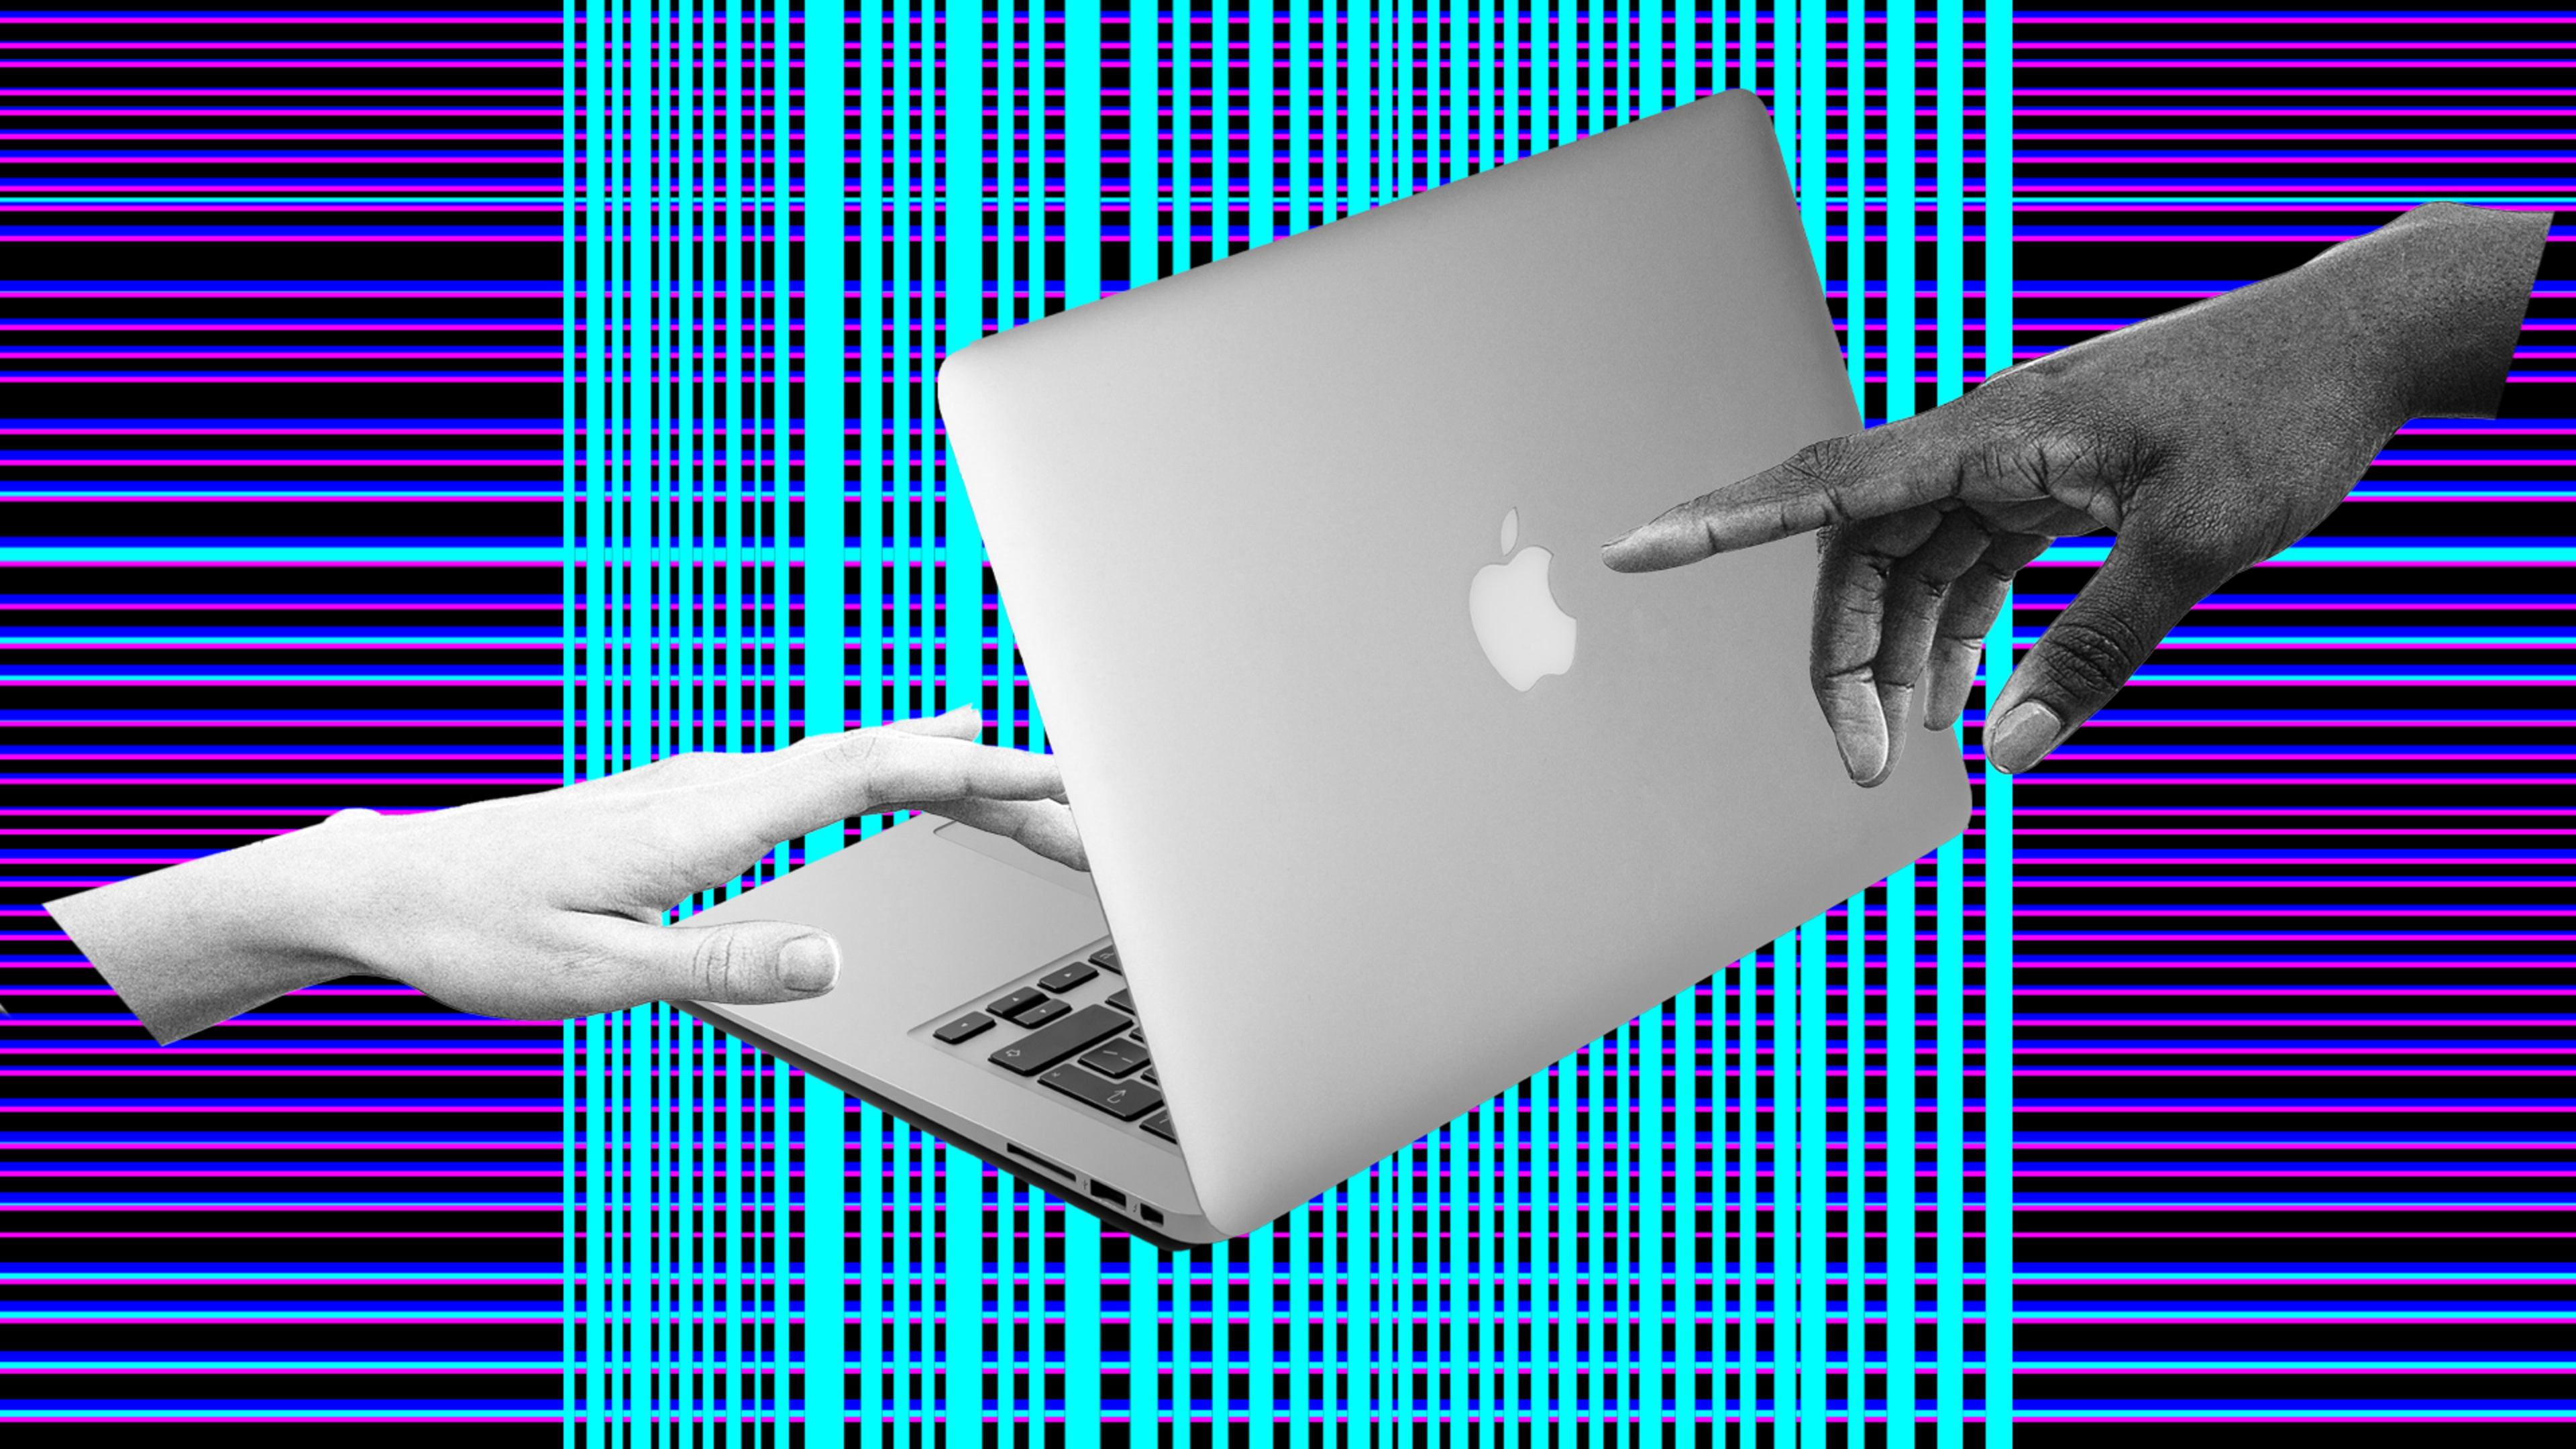 If Macs get touchscreens, Apple’s age of intransigence really is over